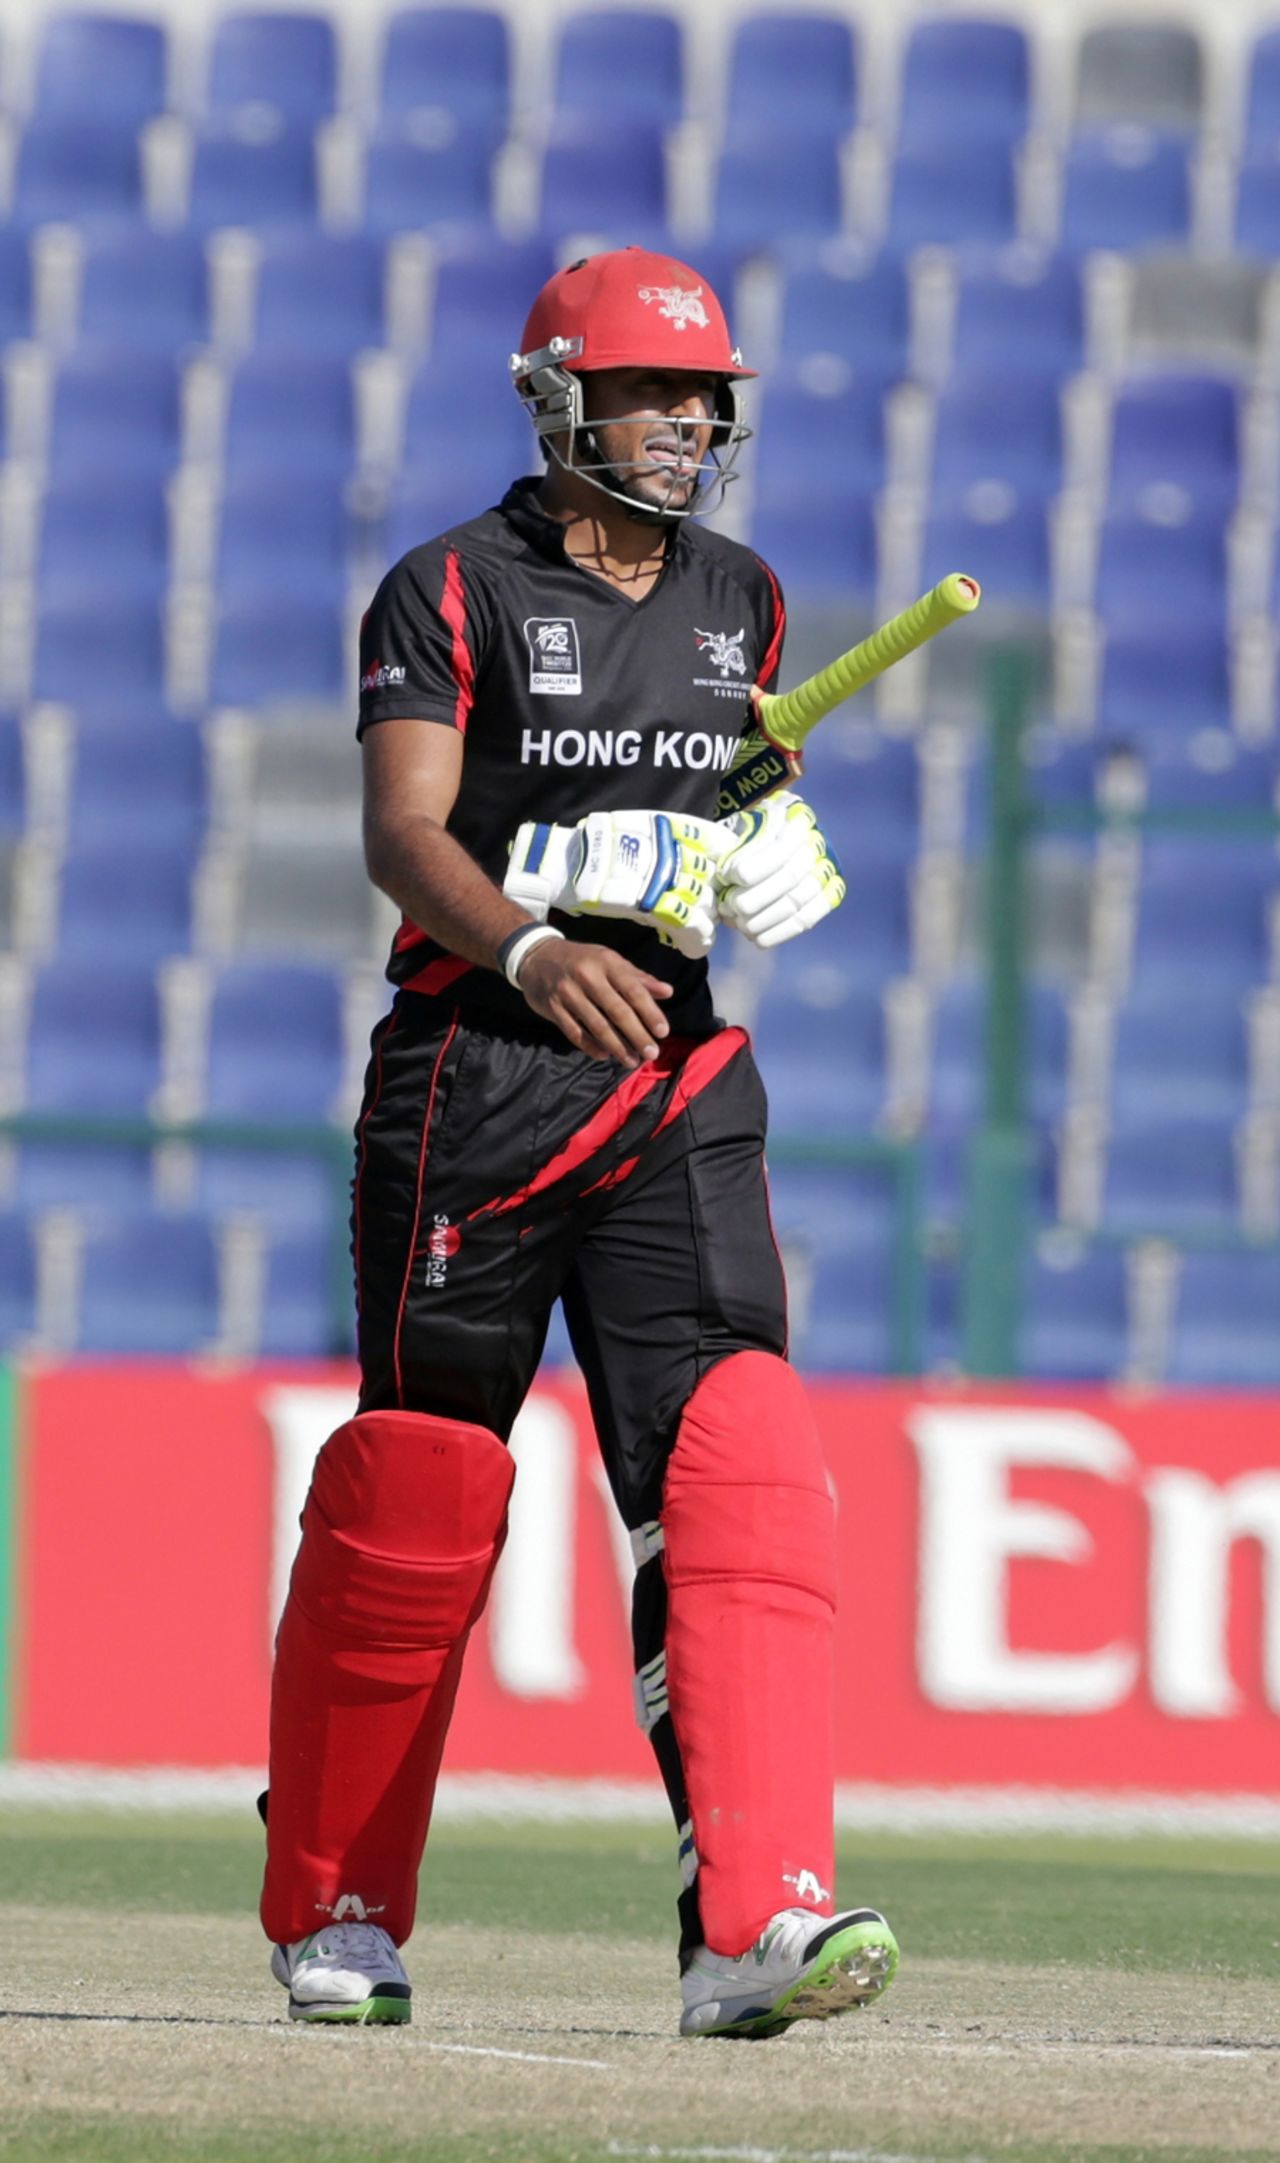 Nizakat Khan of Hong Kong after being dismissed during the Qualifying Play-off match 64 between Papua New Guinea and Hong Kong at the ICC World Twenty20 Qualifiers at the Zayed Cricket Stadium on November 28, 2013 in Abu Dhabi, United Arab Emirates. (Photo by Graham Crouch-IDI/IDI via Getty Images)